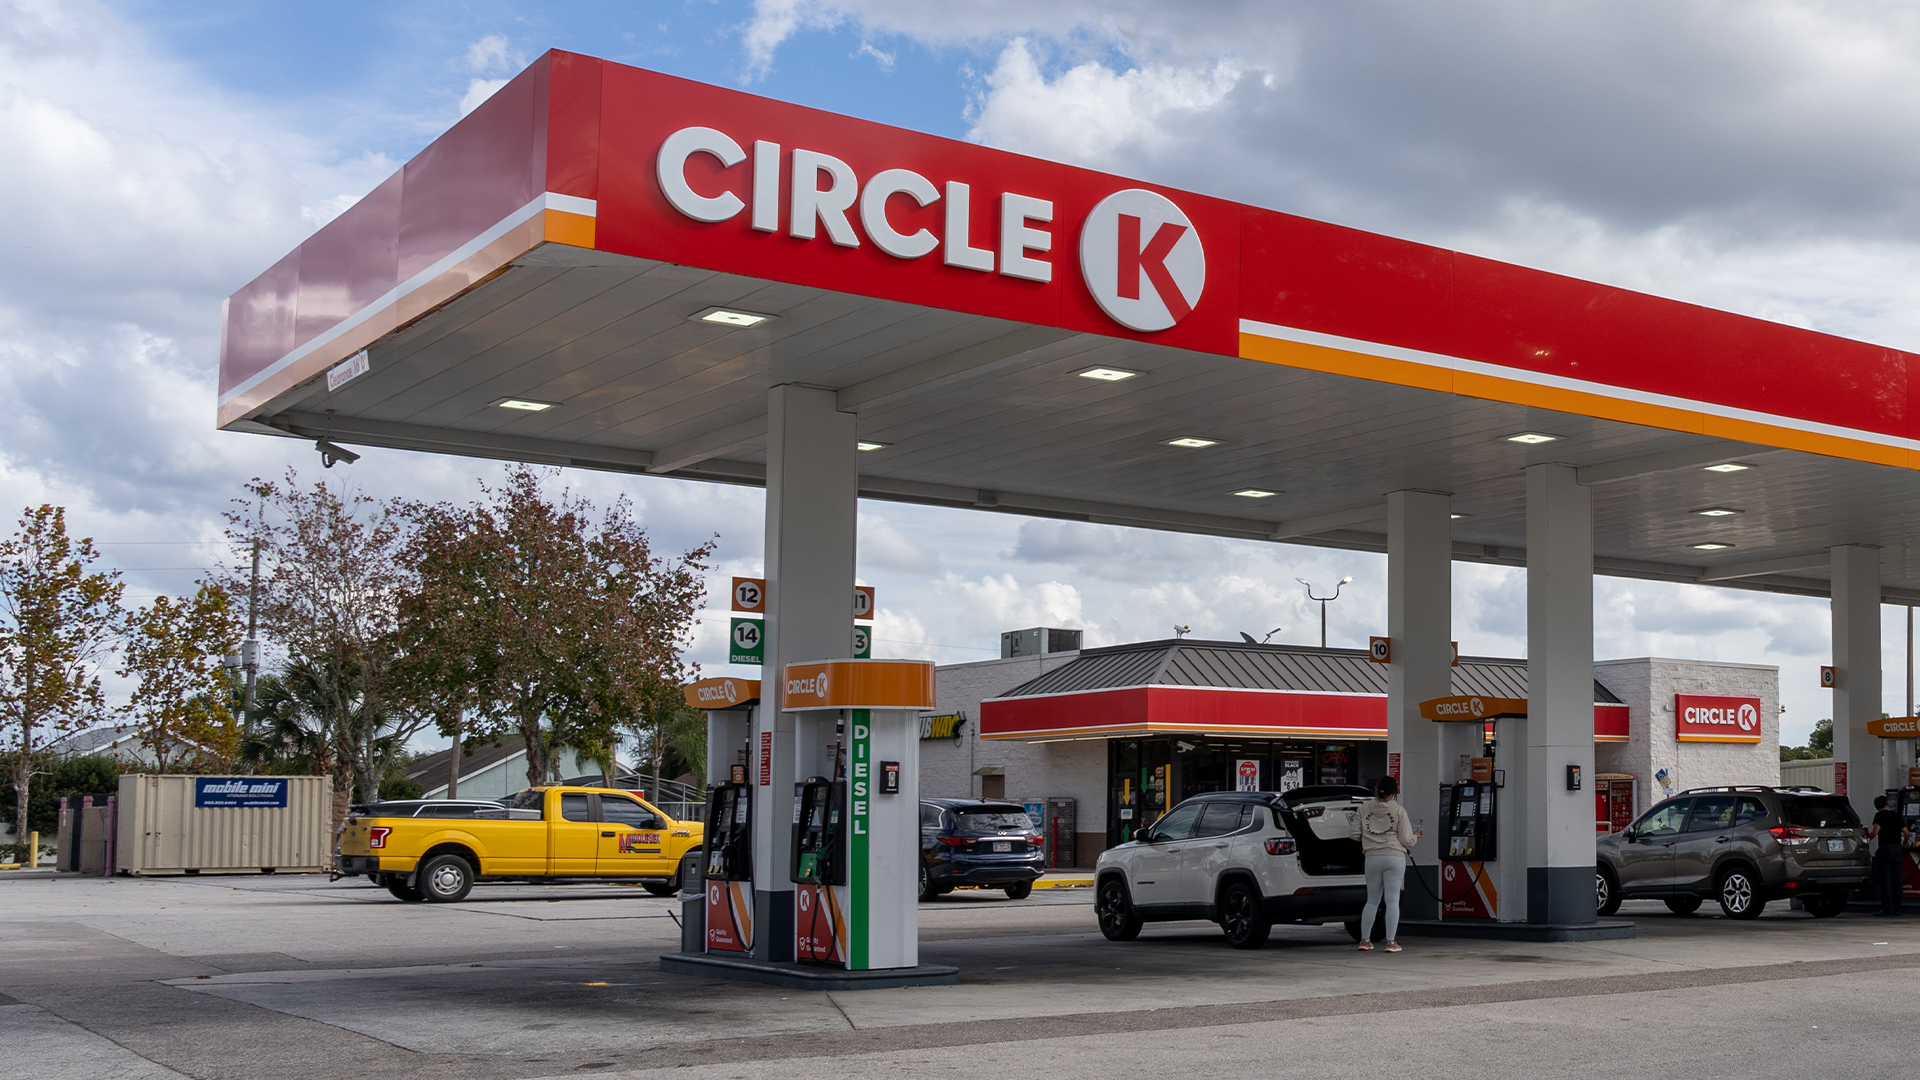 ‘Next level stupid,’ Circle K customer moans at self-checkout station – but technology is already at thousands of stores [Video]